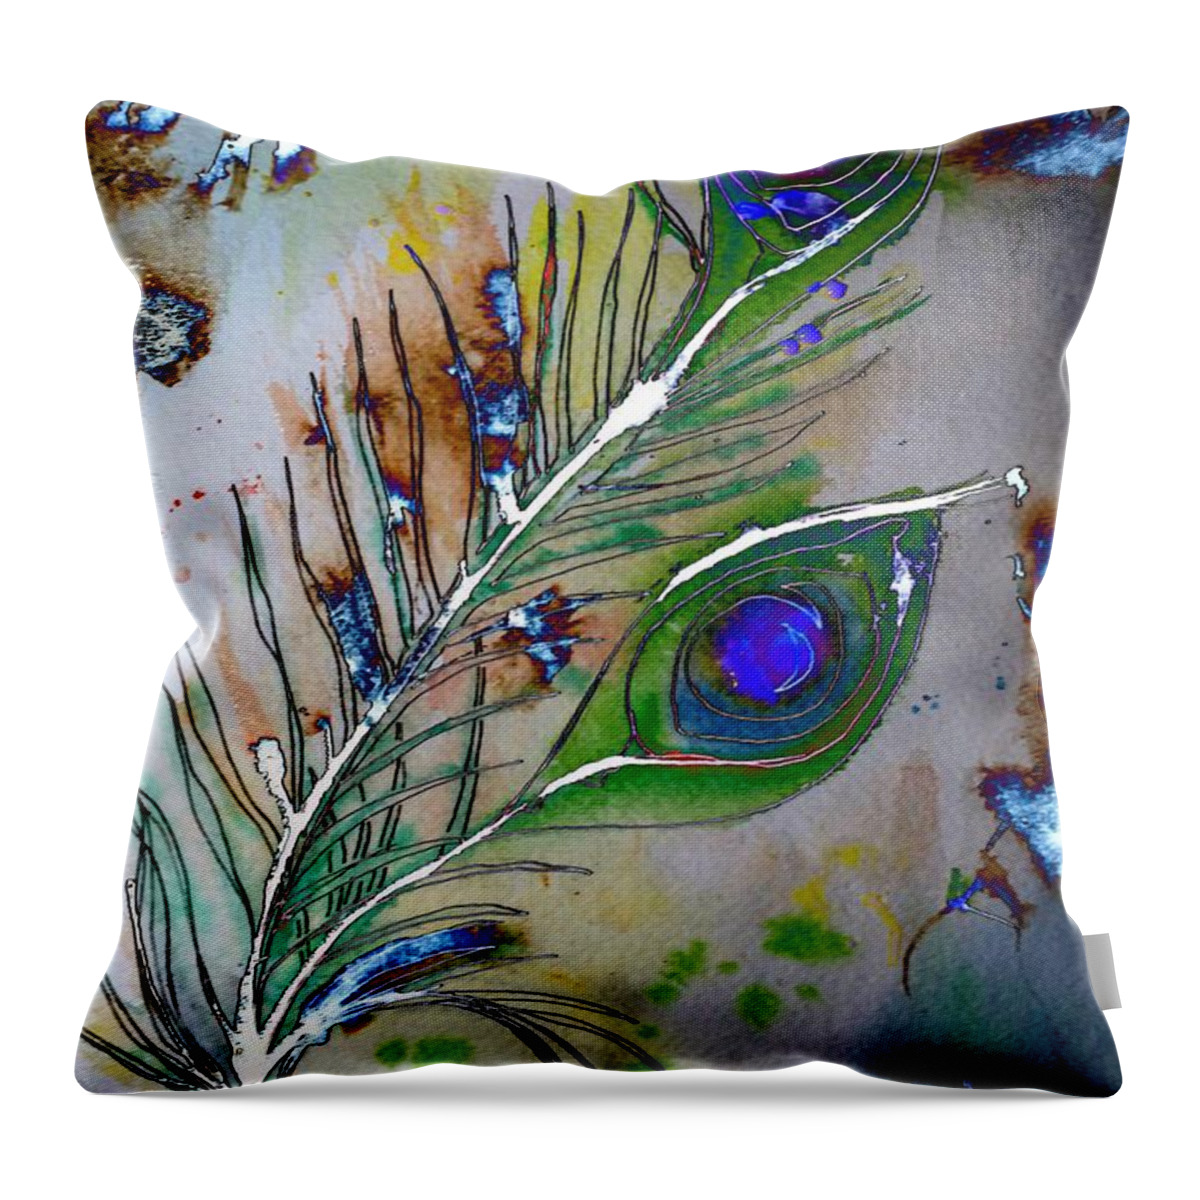 Feather Throw Pillow featuring the painting Pretty As A Peacock by Denise Tomasura